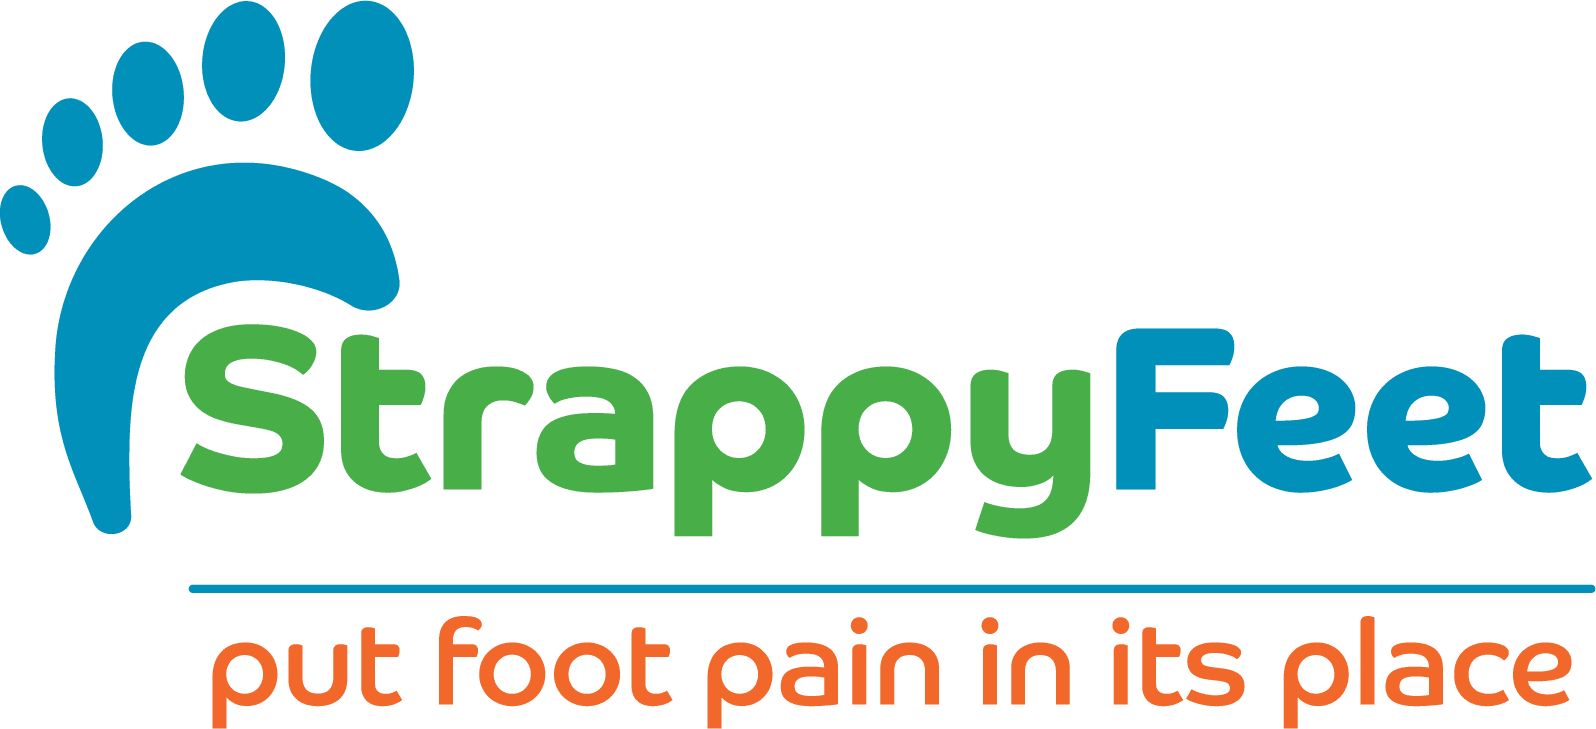 StrappyFeet™ Foot Pads for Pain Relief, Ball of Foot and Bottom of Foot  Pain Relief, Reusable, Washable Corn Pad Cushion, Callus and Blister Pad